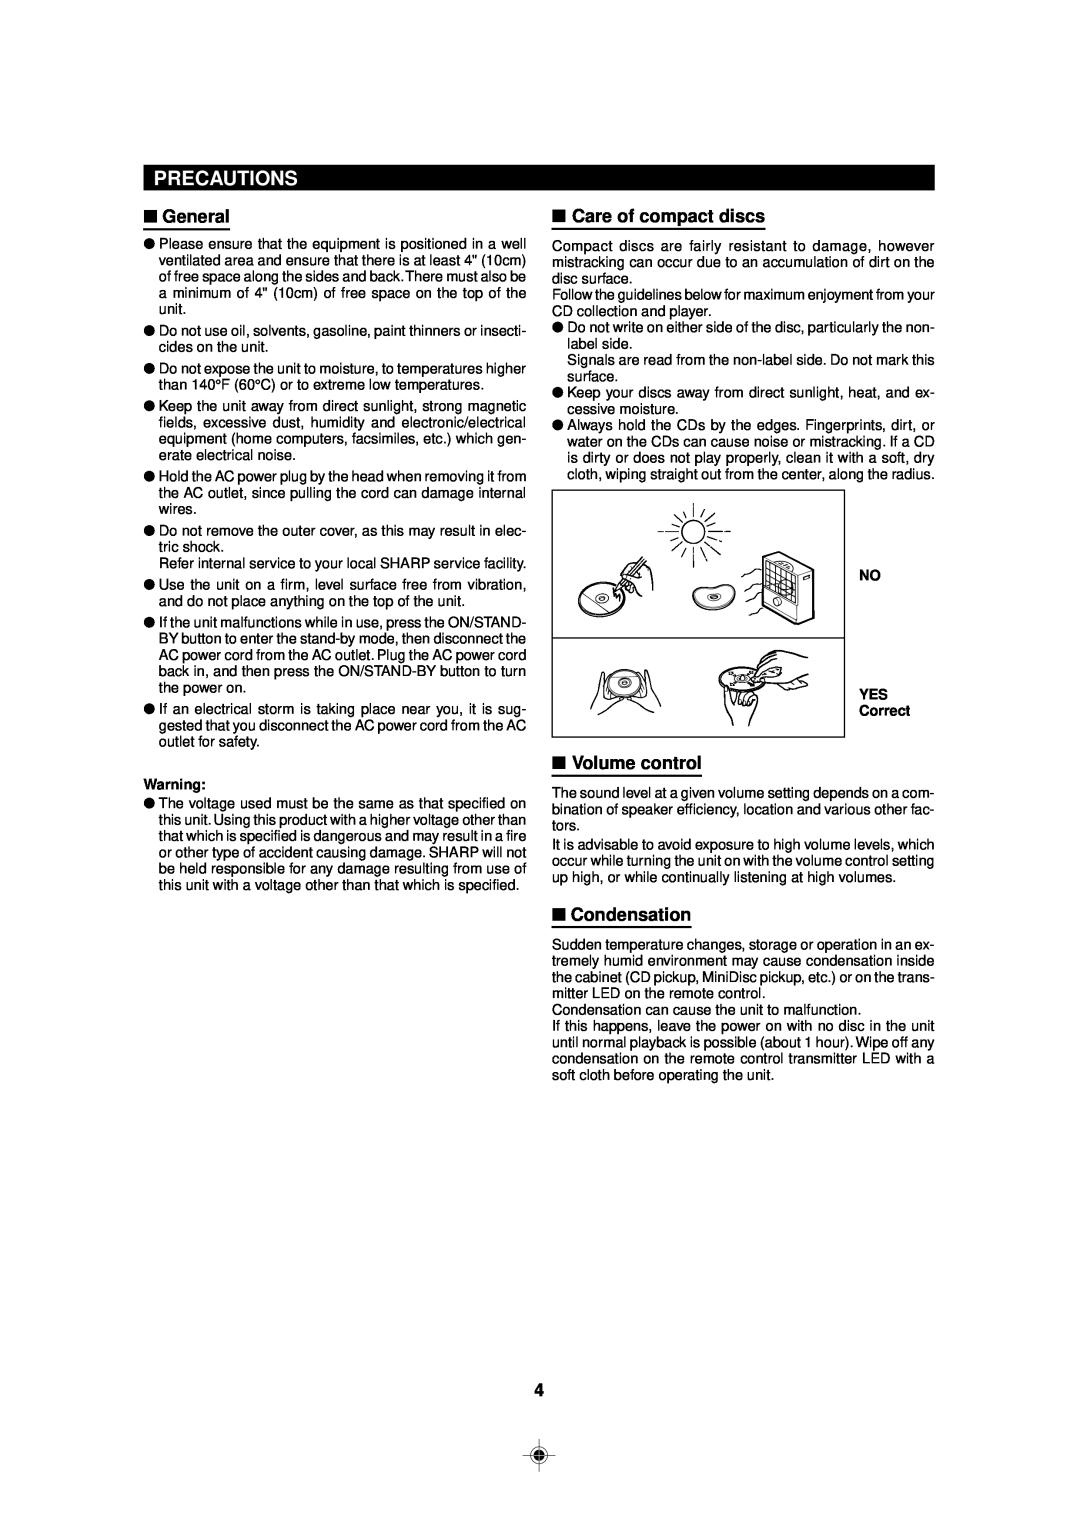 Sharp MD-MX30 MD operation manual Precautions, General, Care of compact discs, Volume control, Condensation 